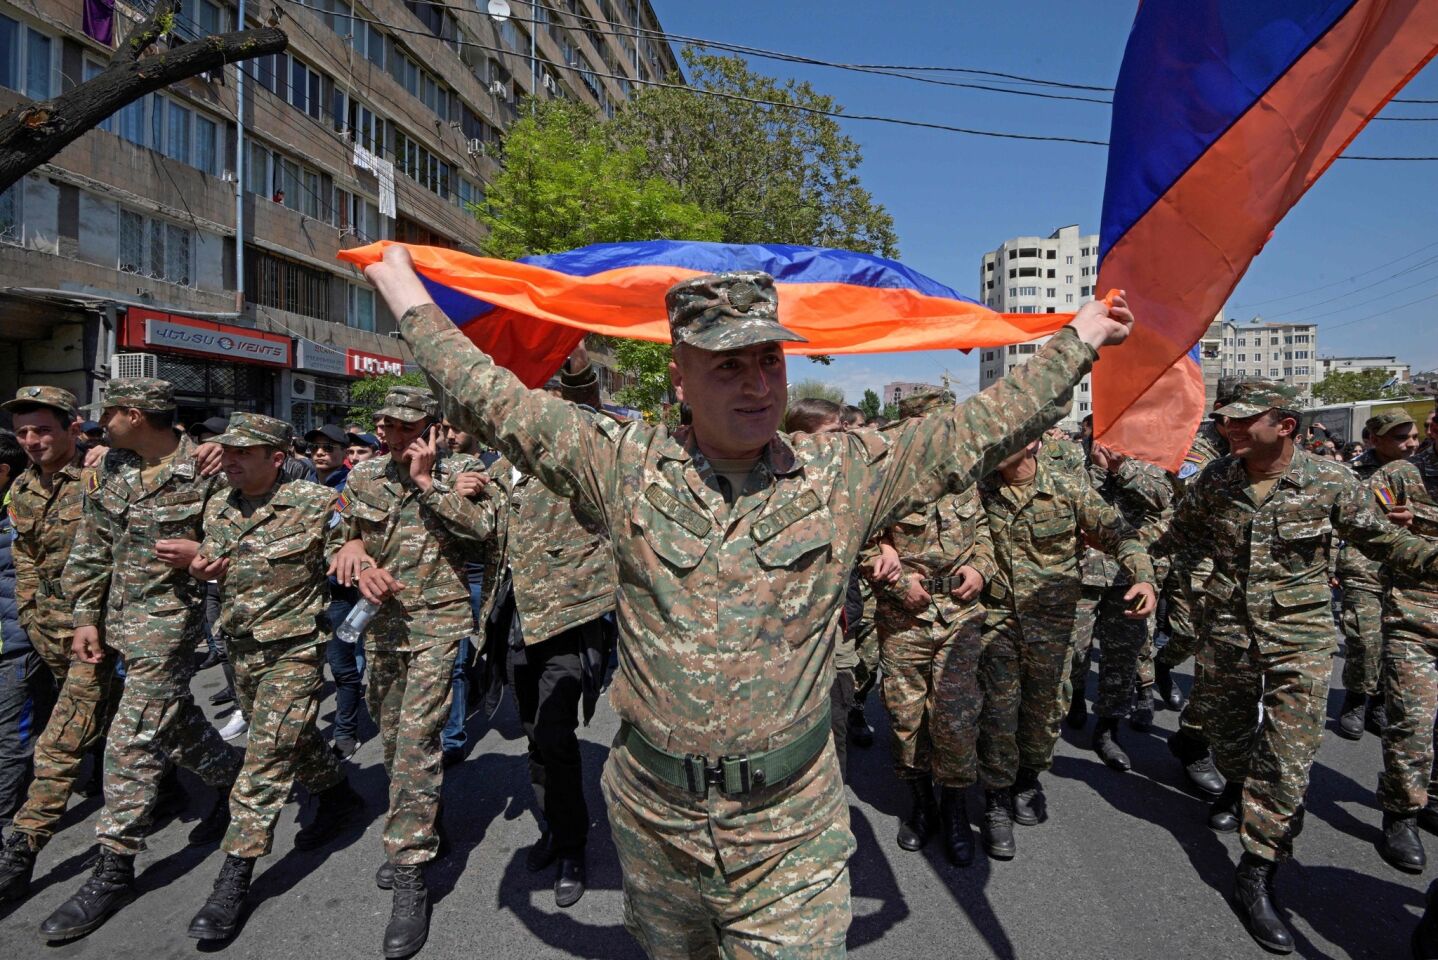 Armenian servicemen take part in a demonstration in Yerevan, to protest the former president's election as prime minister.